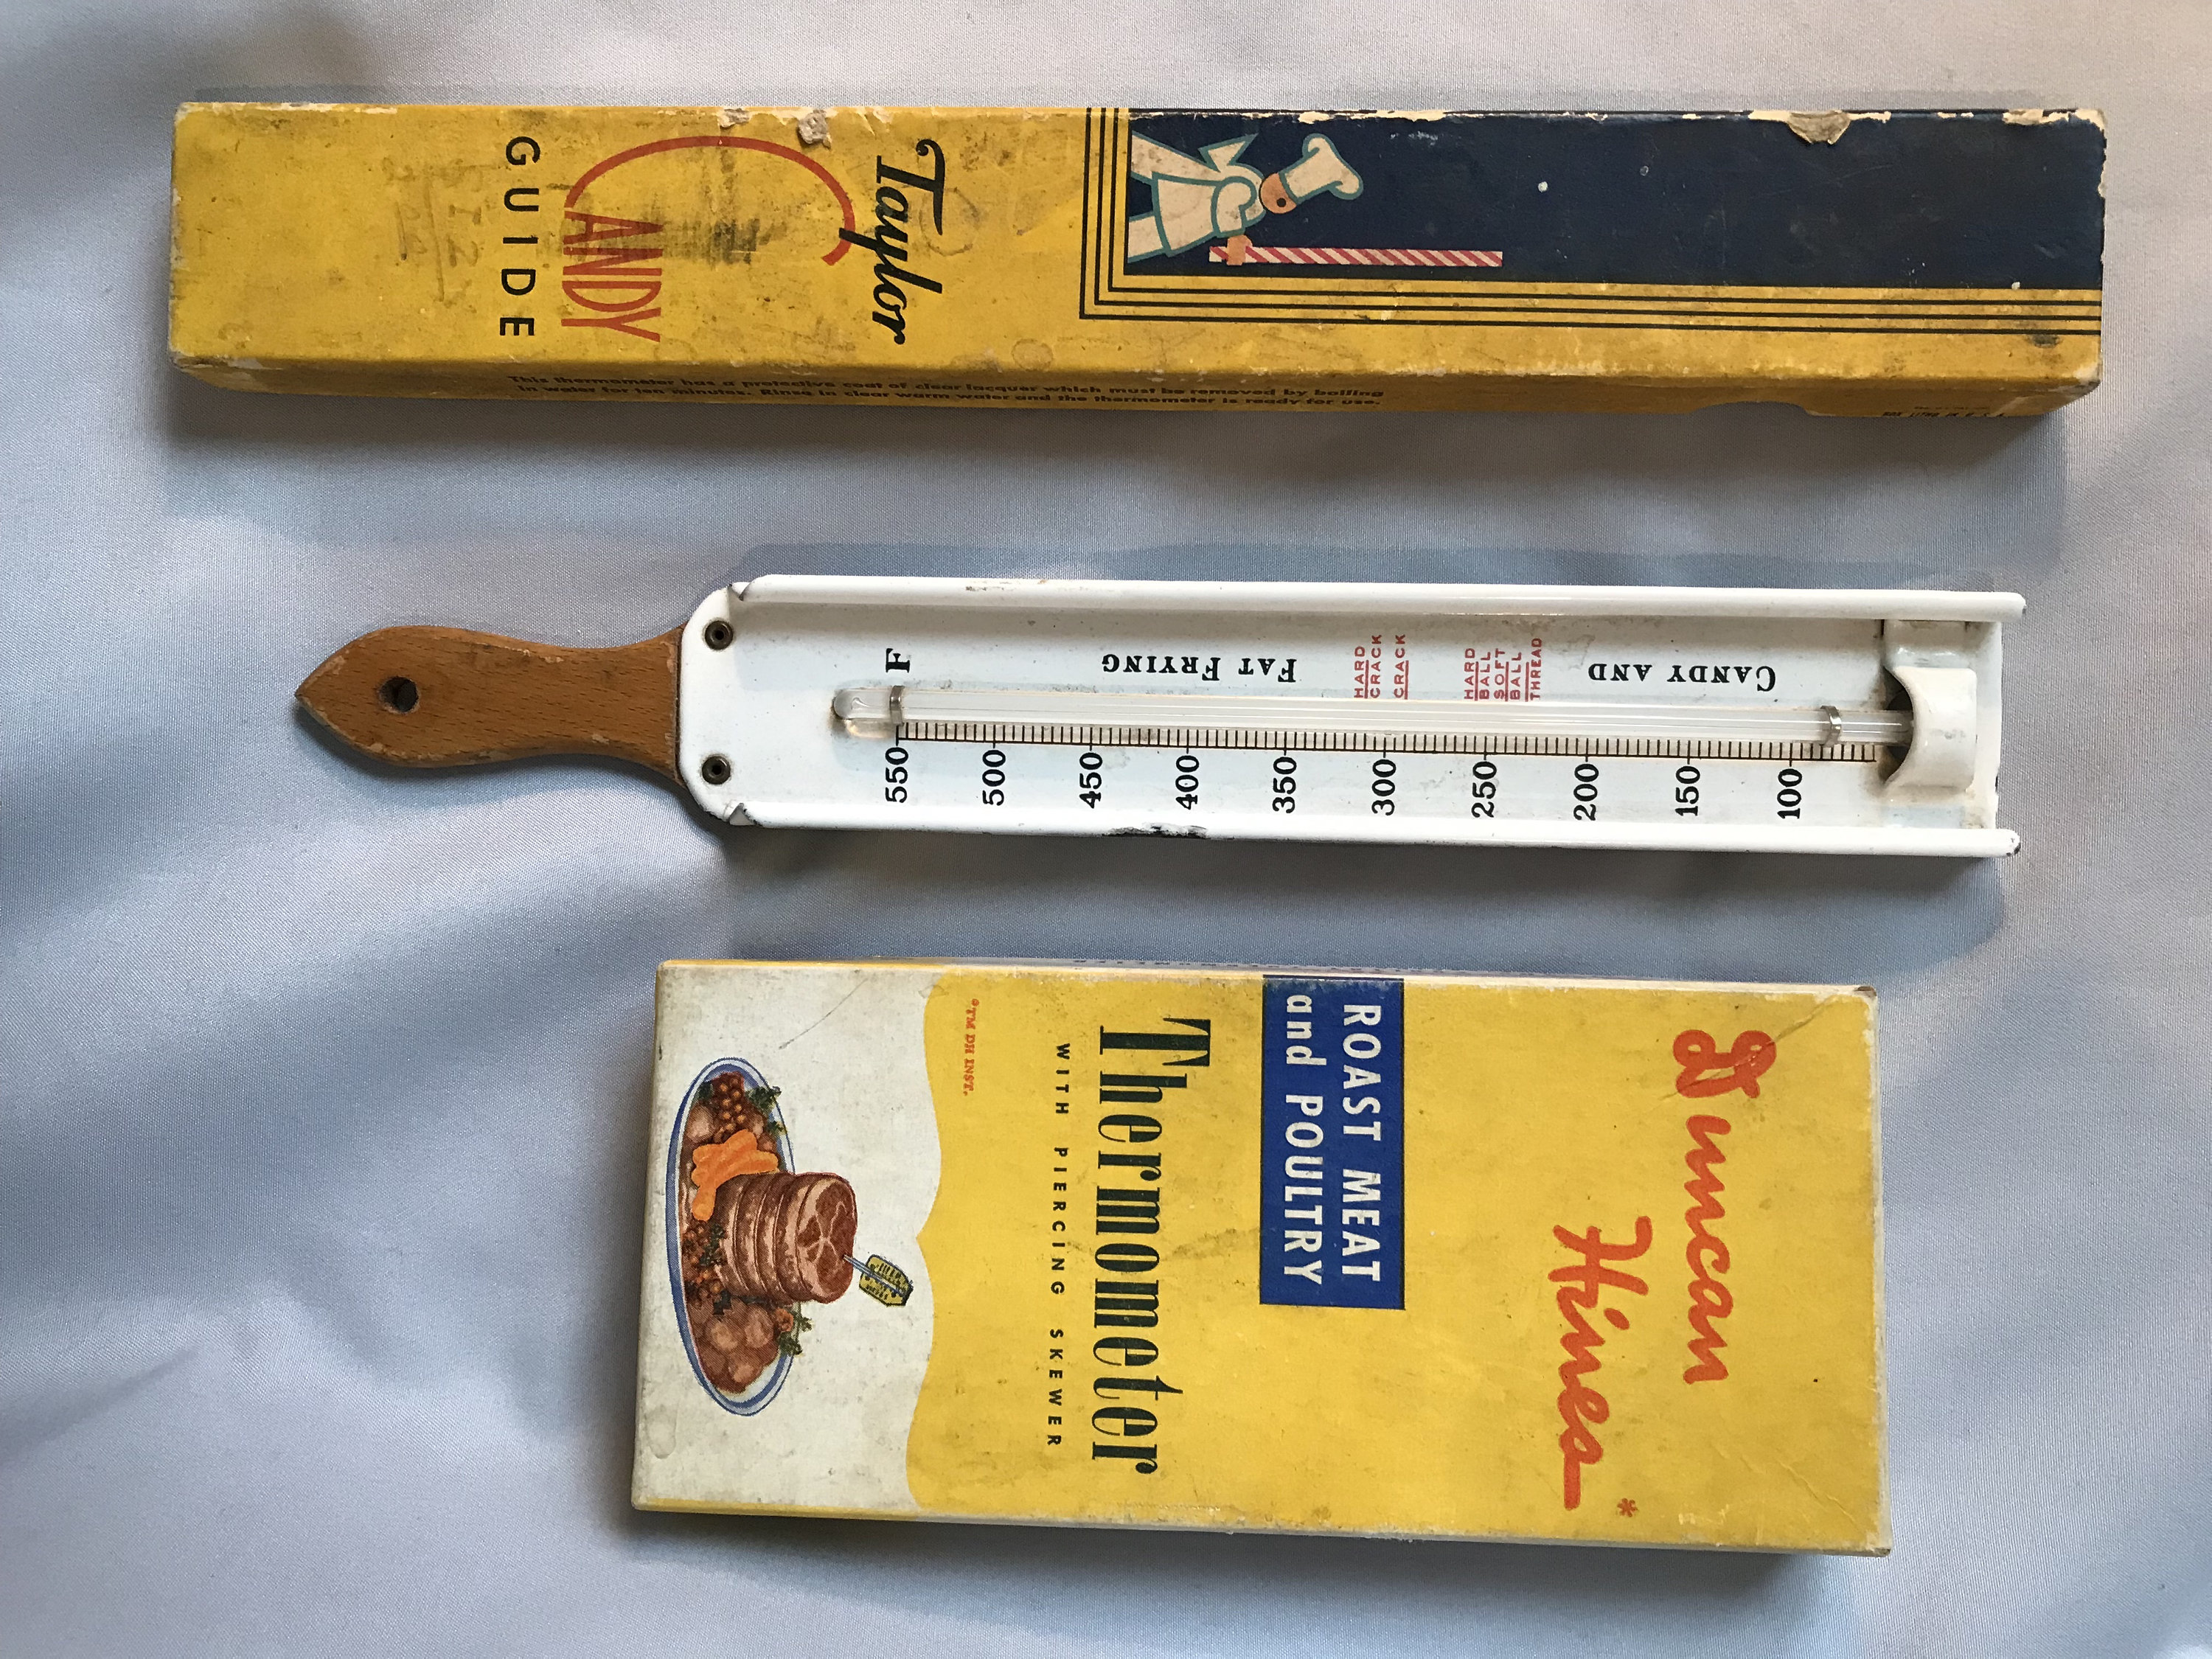 Vintage Taylor Instrument Co Roast Meat Thermometer Pin Instruction Manual  Boxed